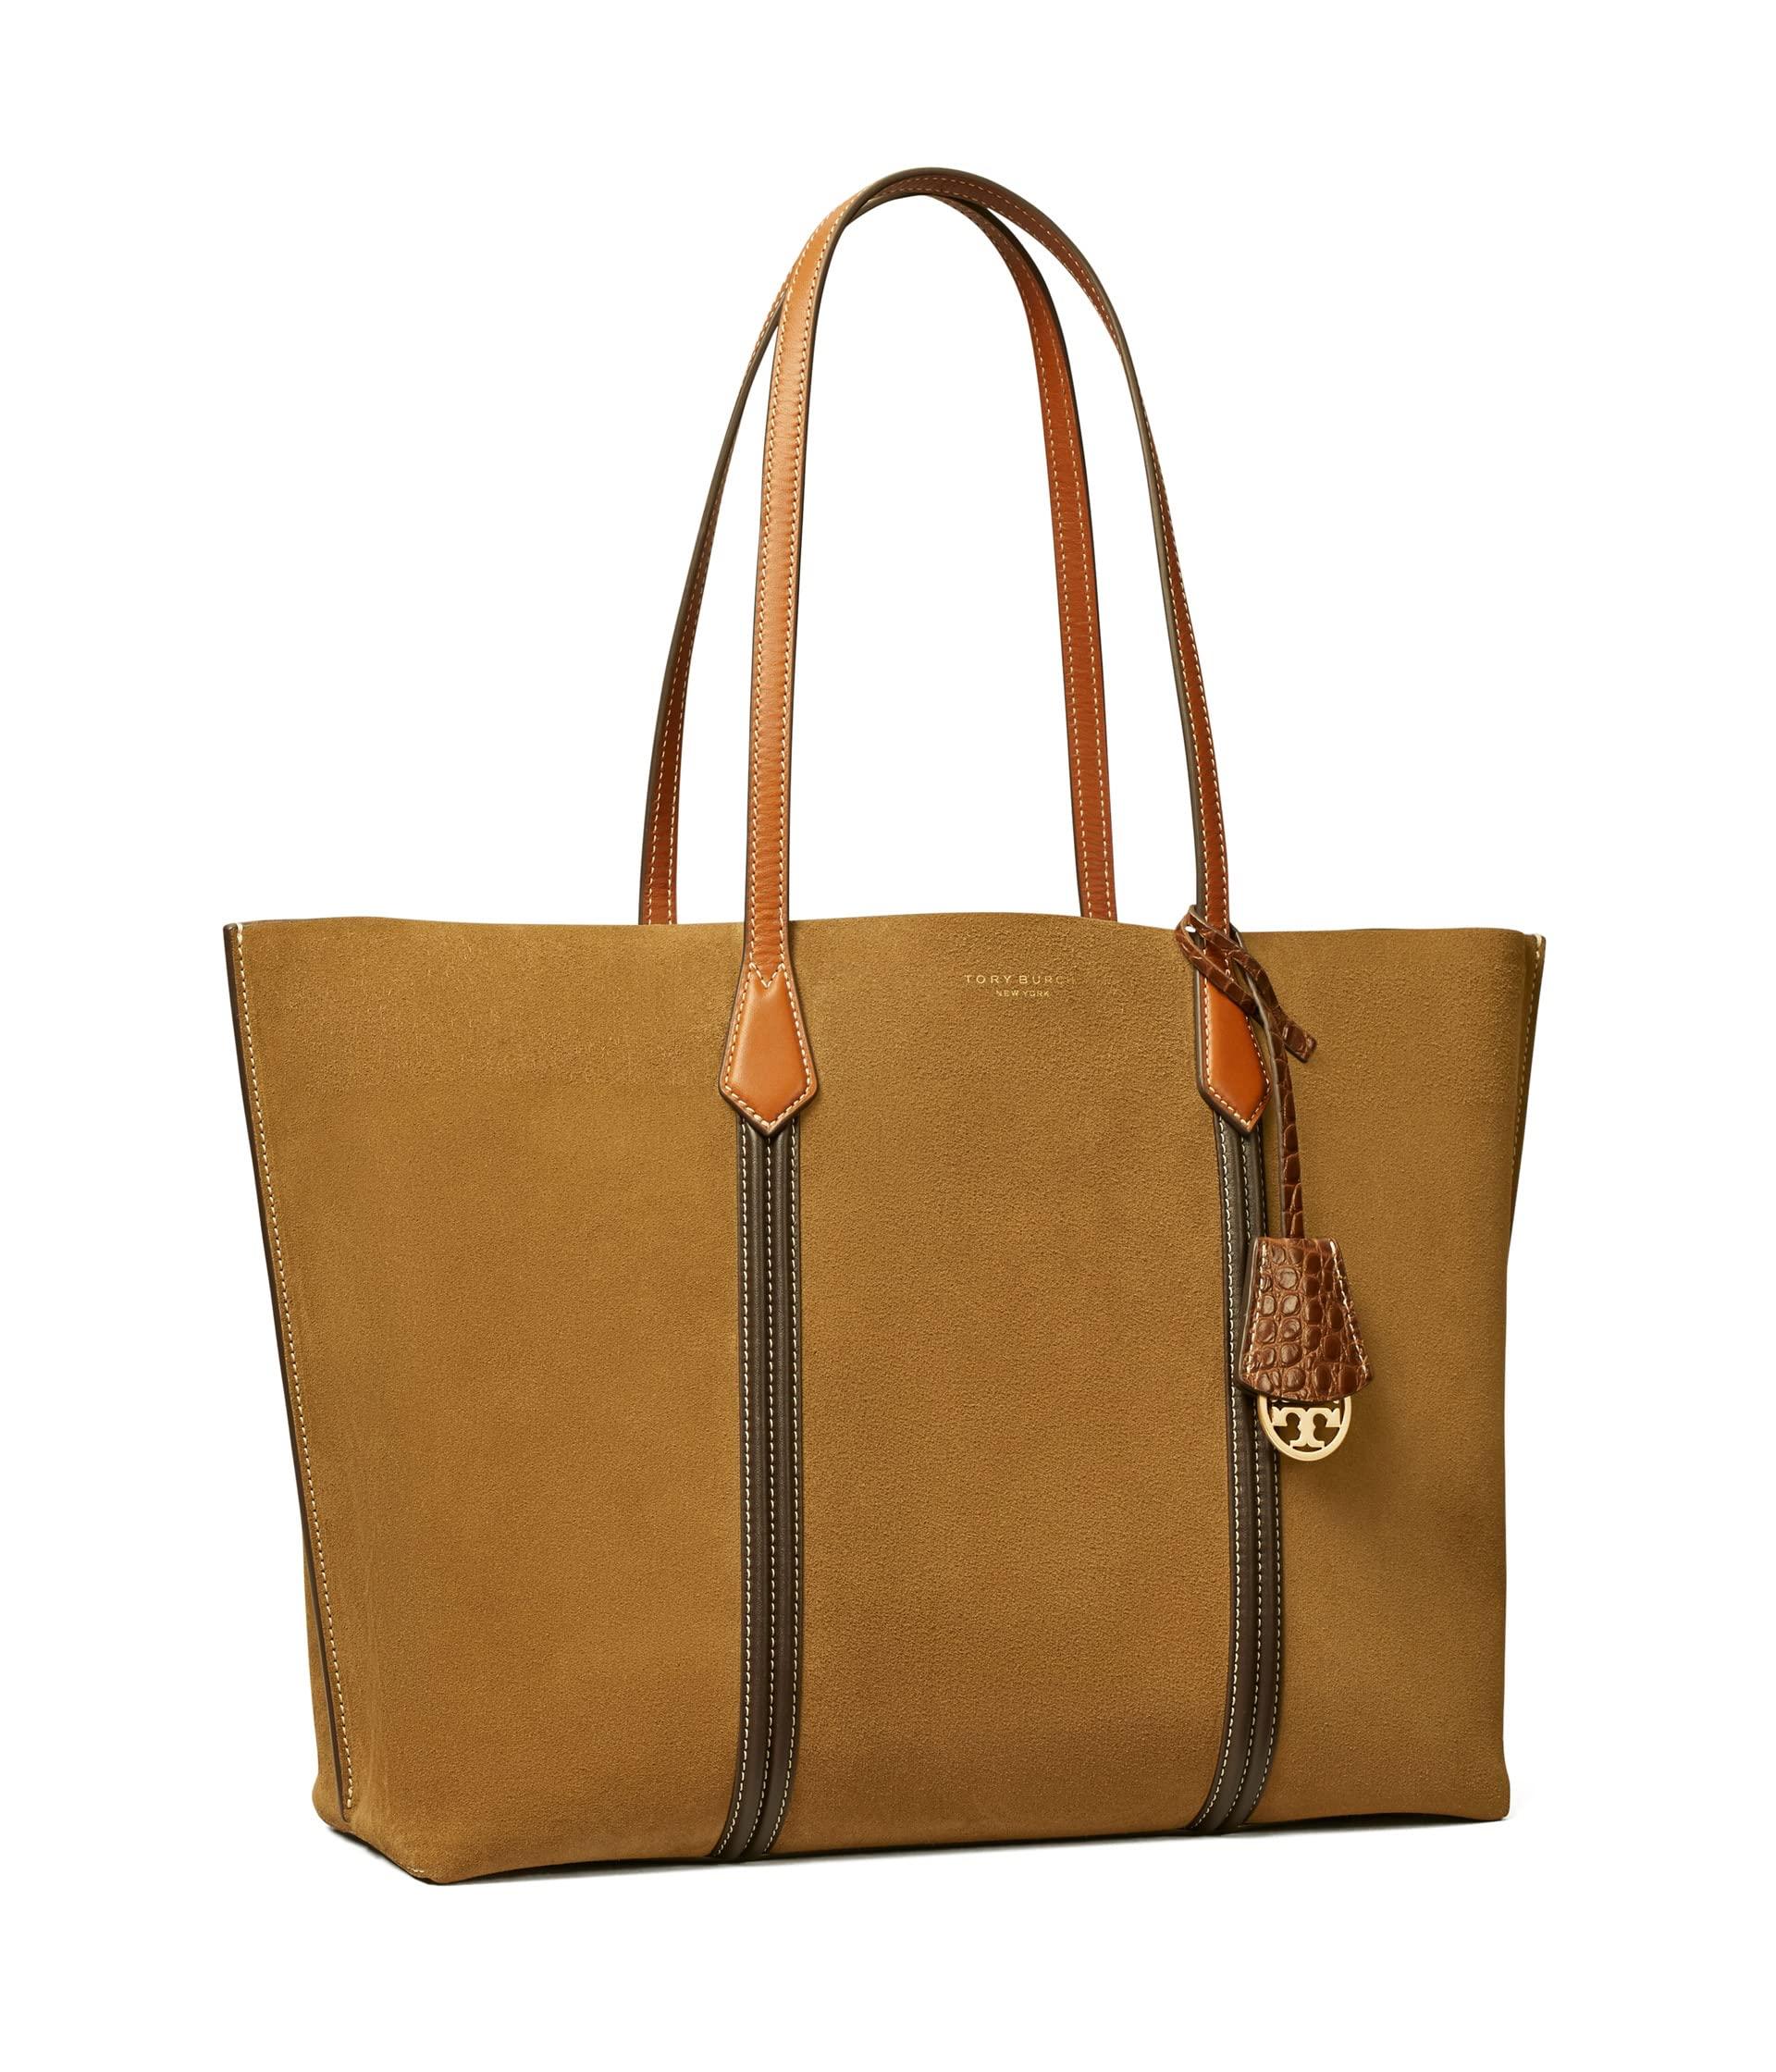 Tory Burch Thea Woven-leather Center-zip Tote in Brown | Lyst